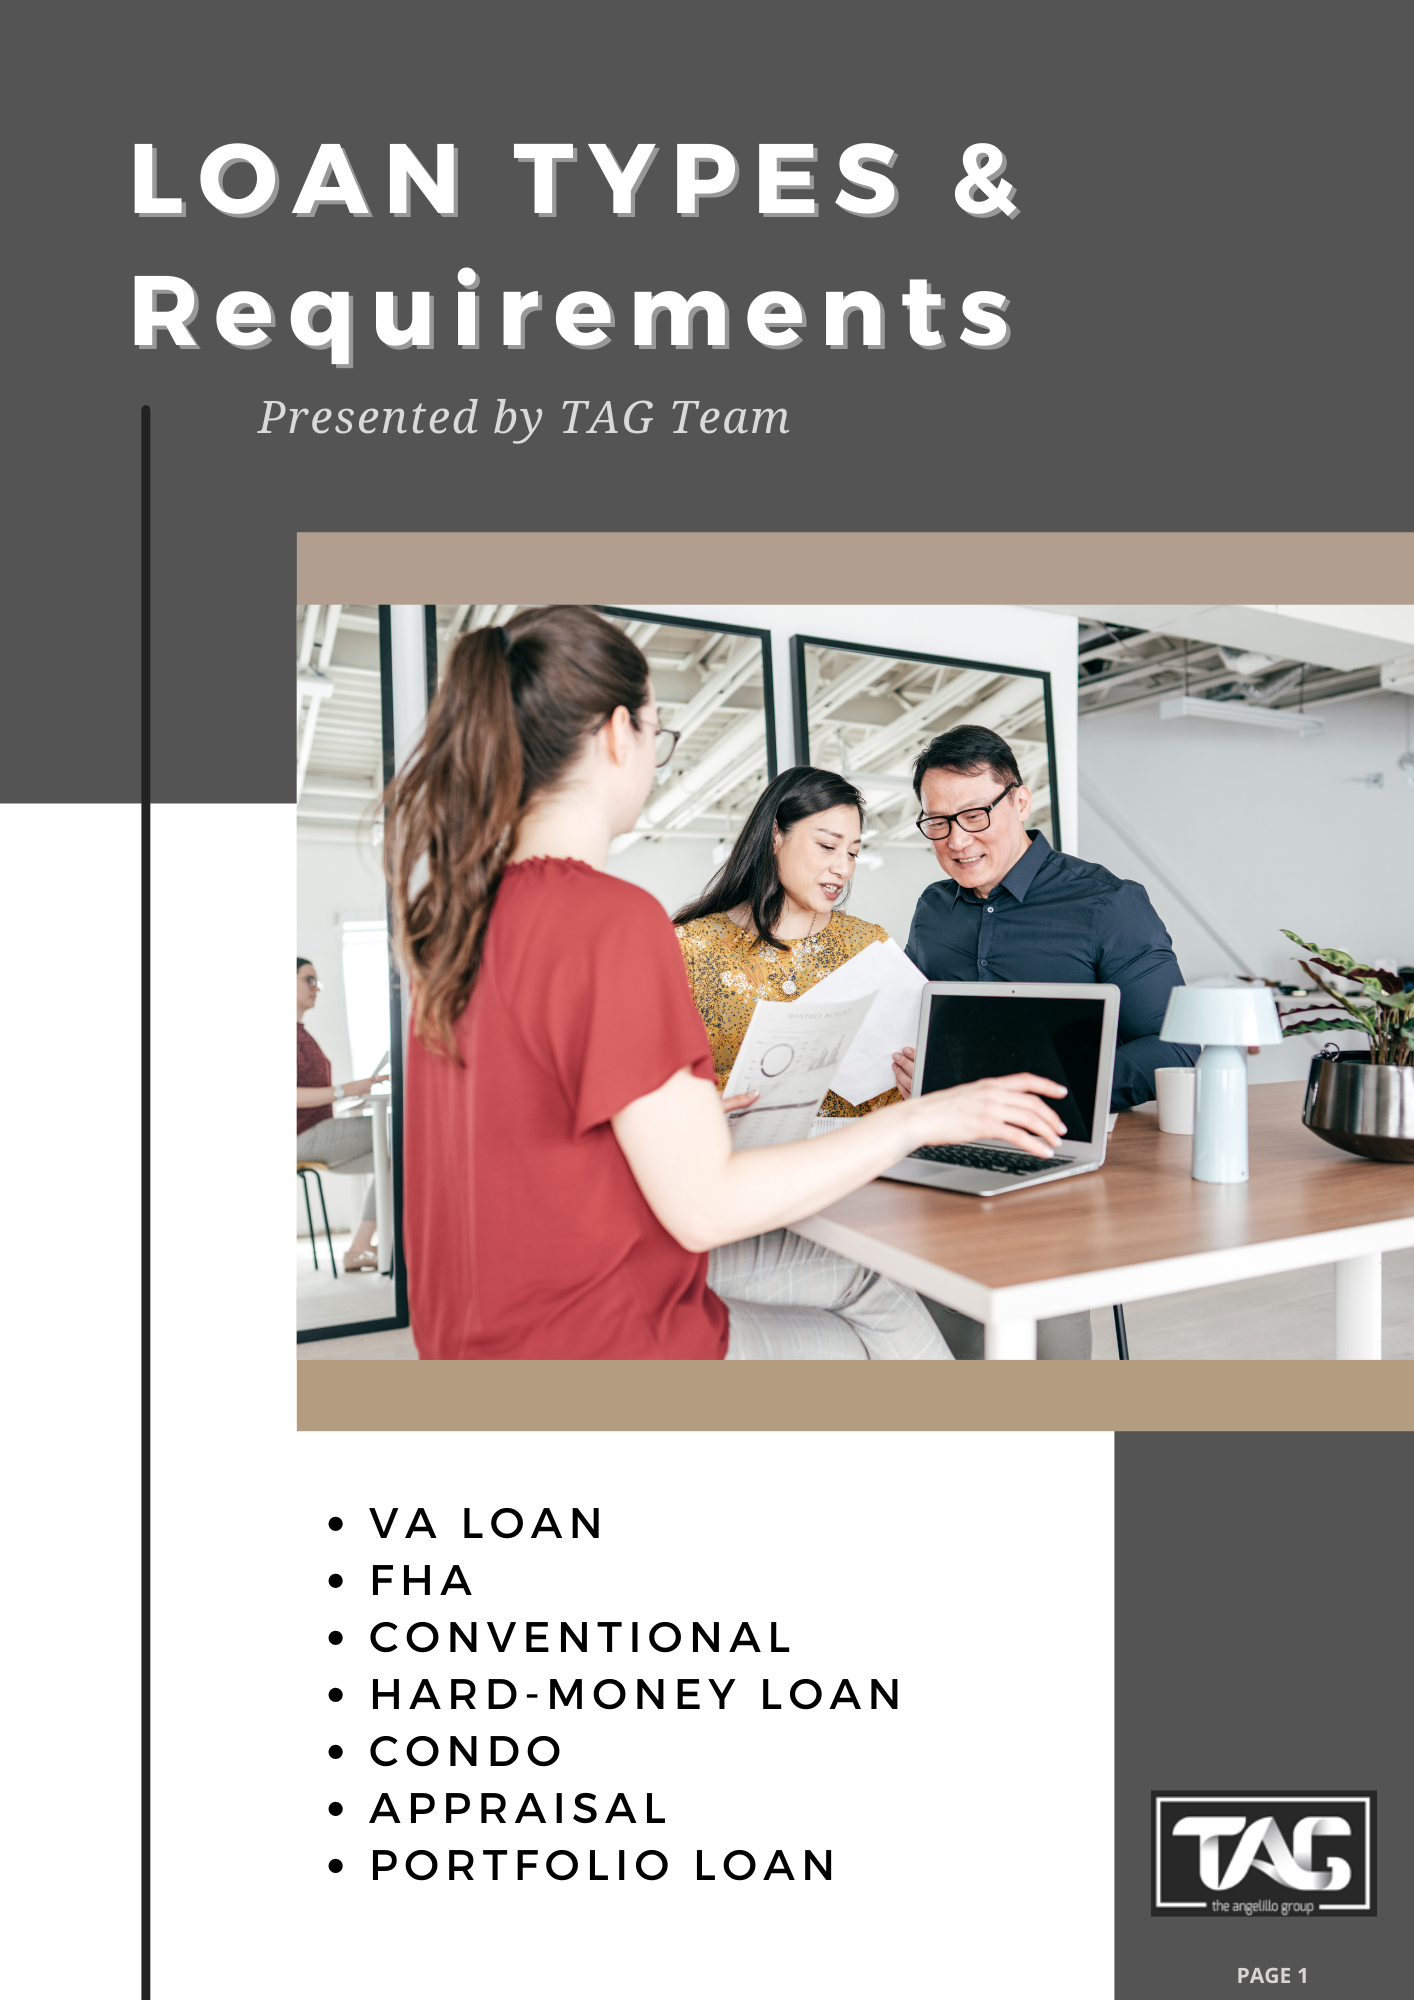 Tagteam LOAN TYPES & Requirements-1